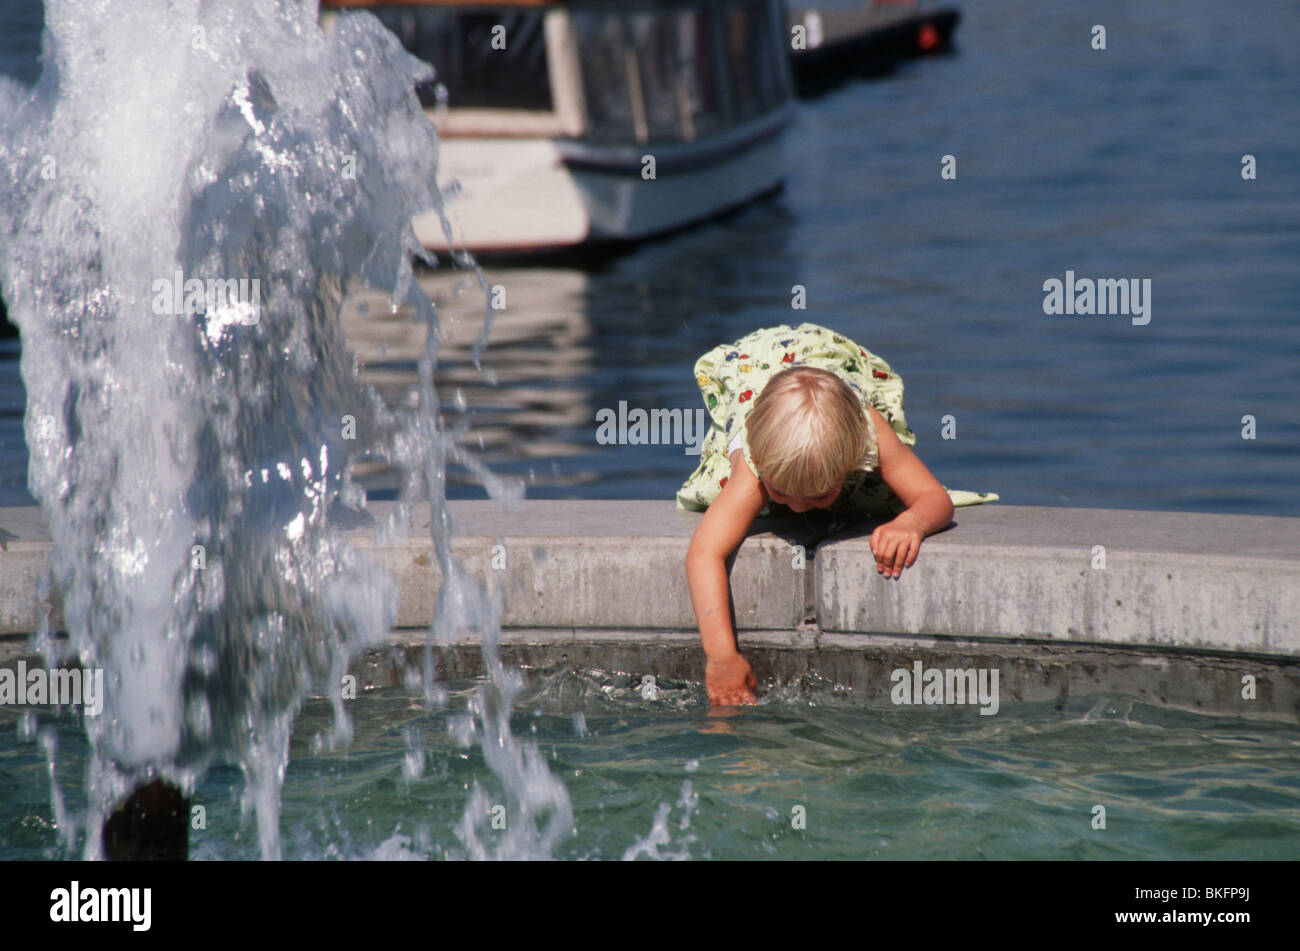 Toddler girl at risk while playing with fountain water outside Stock Photo